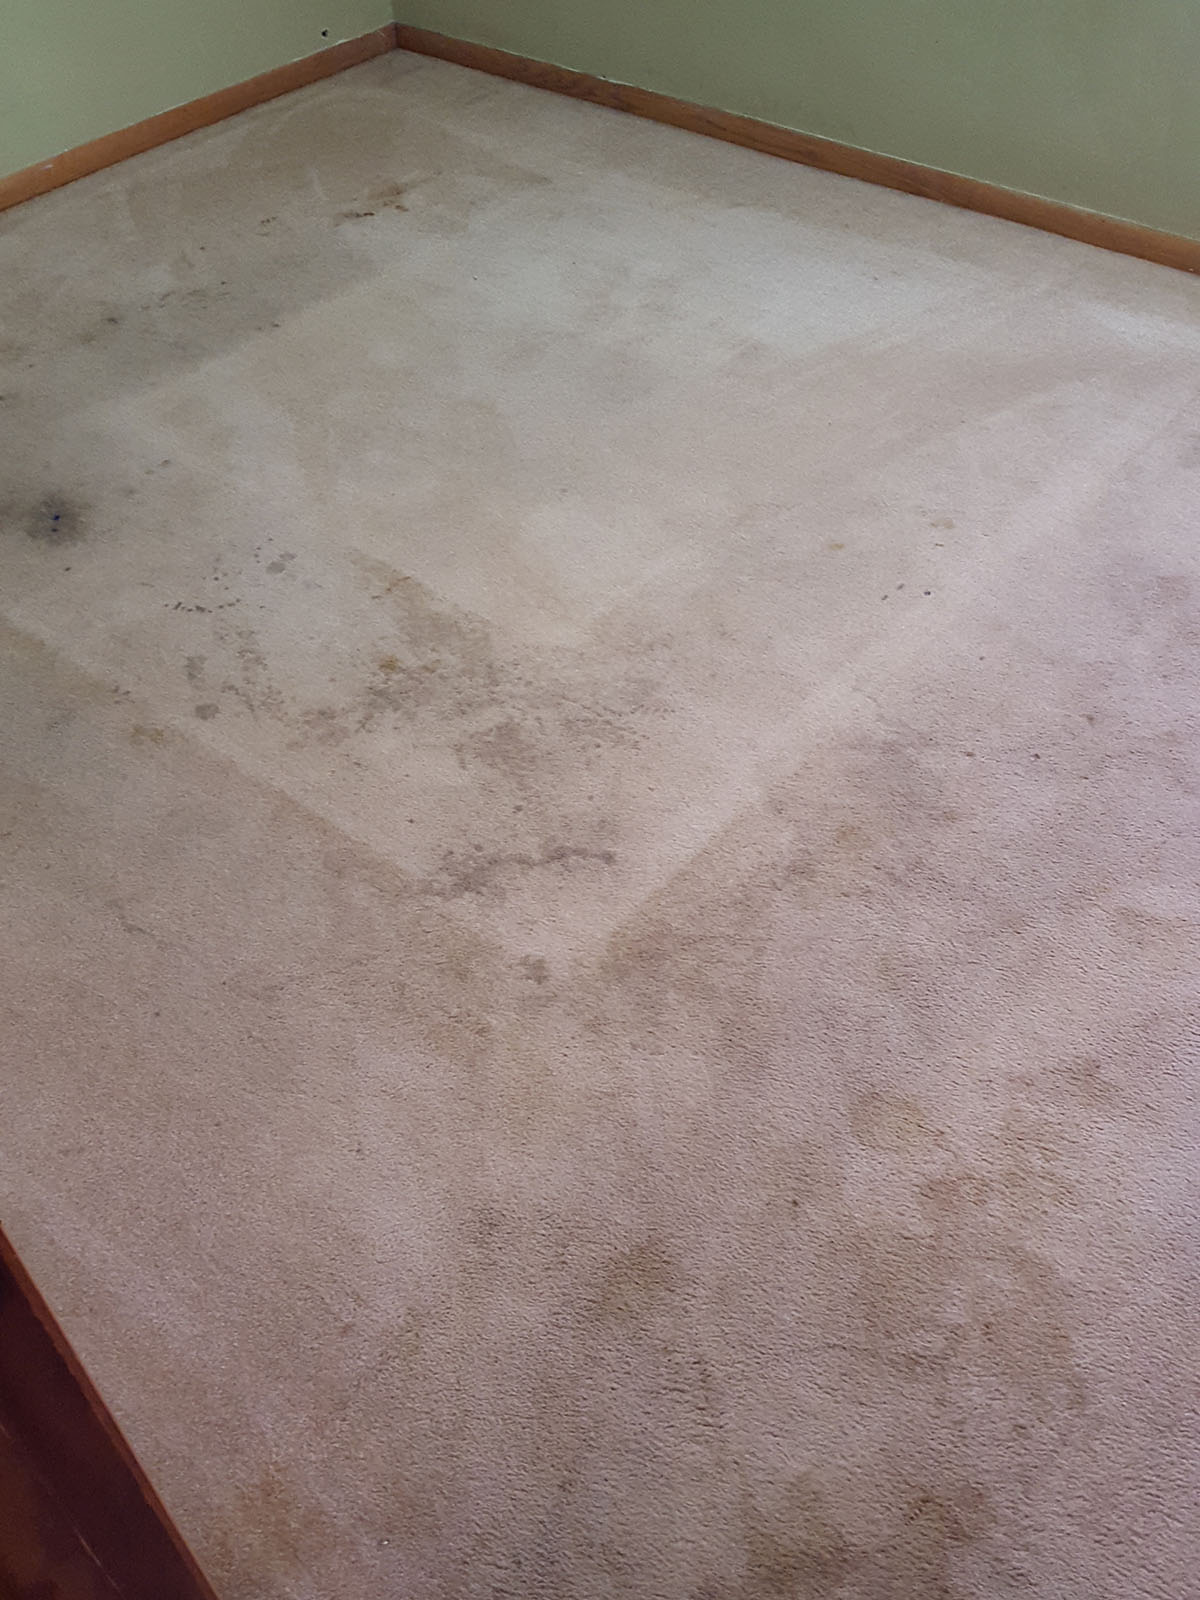 Stained carpet before cleaning